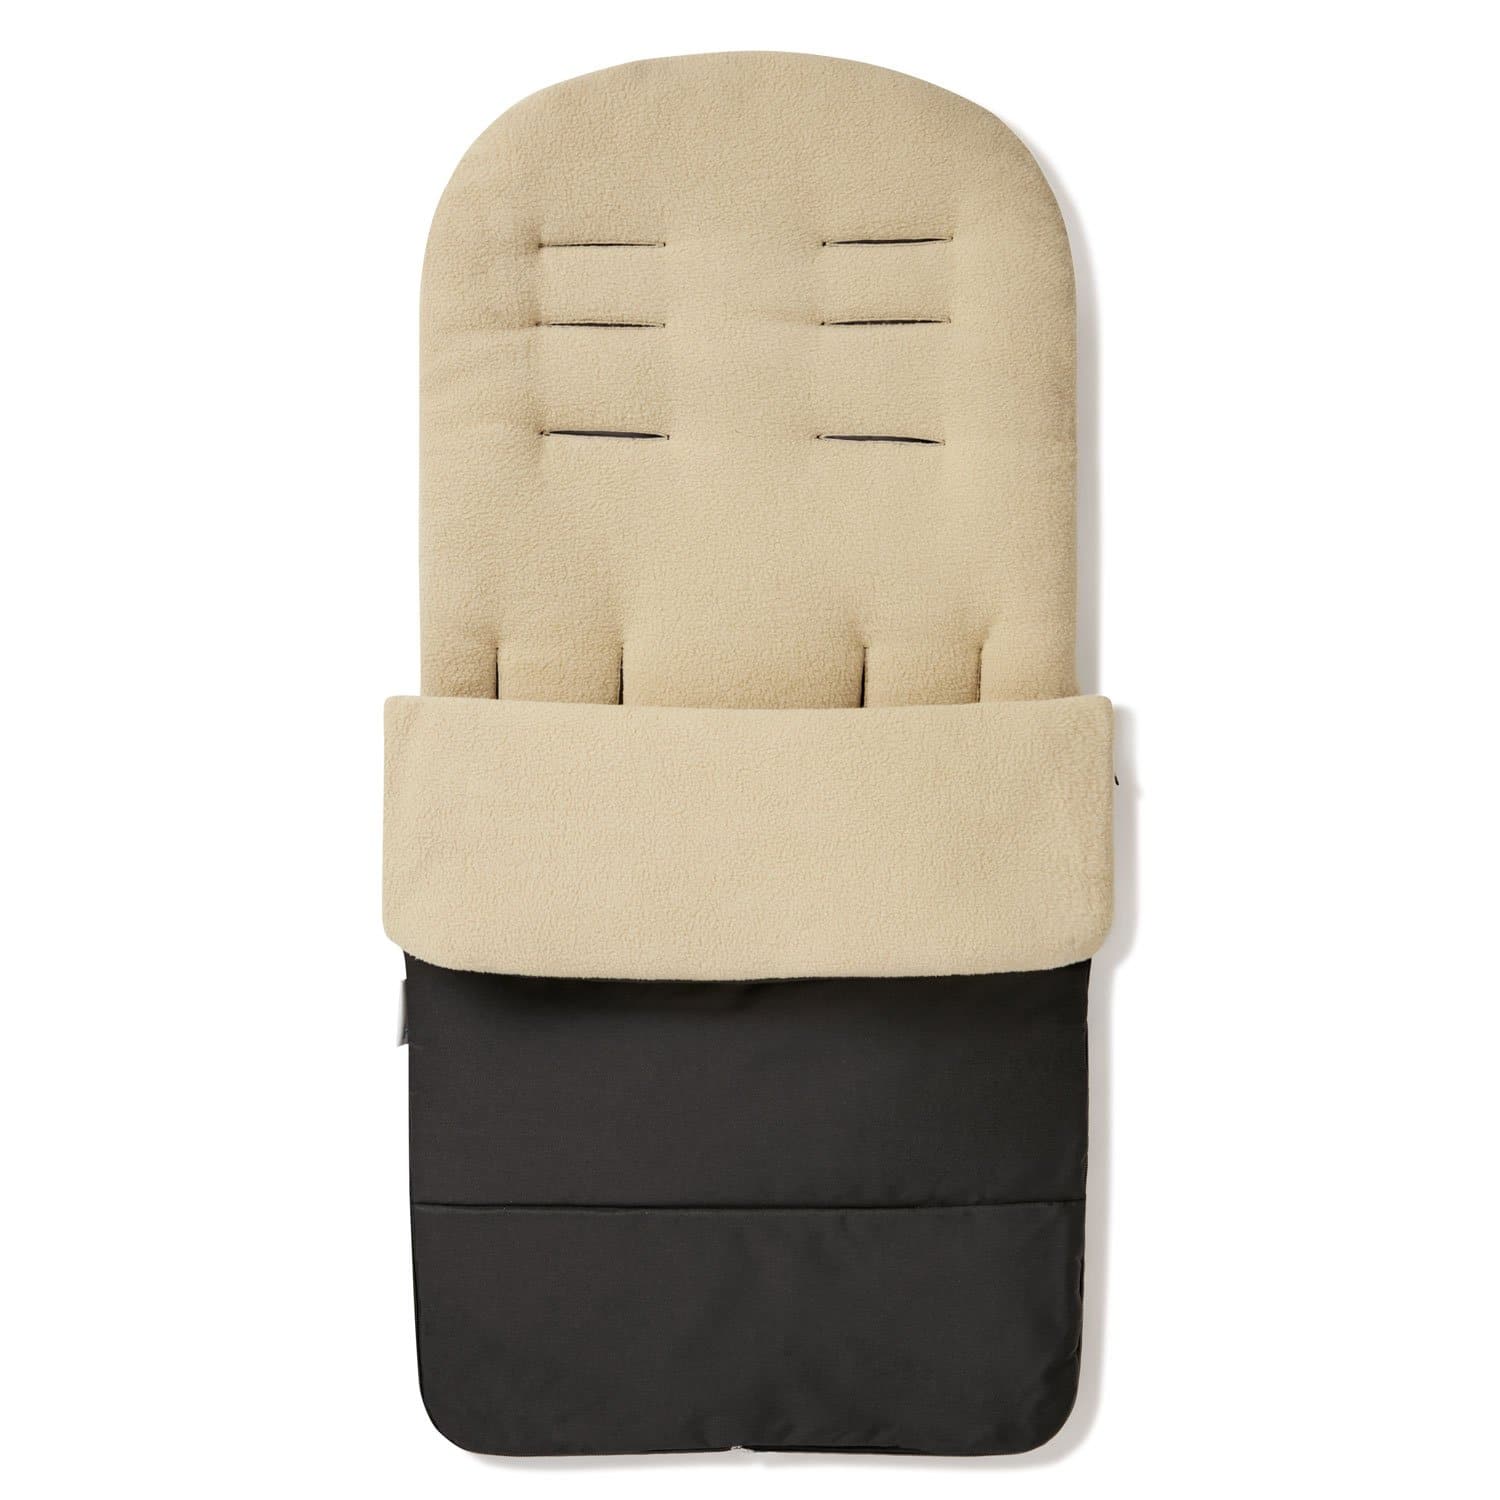 Universal Premium Pushchair Footmuff / Cosy Toes - Fits All Pushchairs / Prams And Buggies - Desert Sand / Fits All Models | For Your Little One